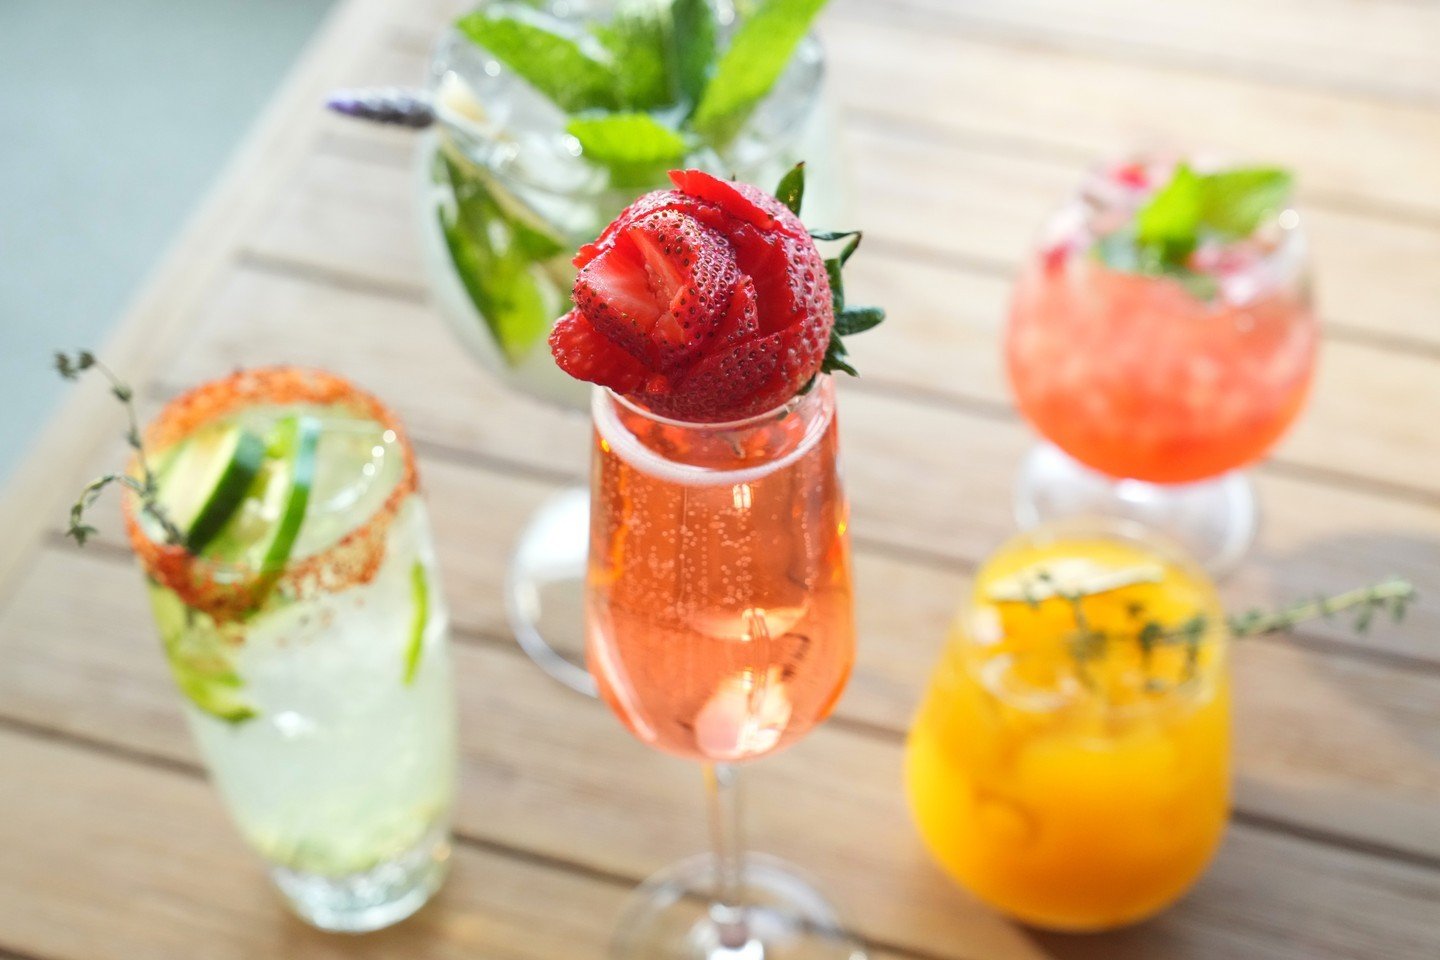 There's nothing like a refreshing cocktail on a warm, sunny day! 😎🍹

Sip into the new season with our Spring-Summer selection of handcrafted cocktails, featuring Strawberry Basil Margarita 🍓, Mezcal Mango Passion 🥭, and many more!

#primemetsteak